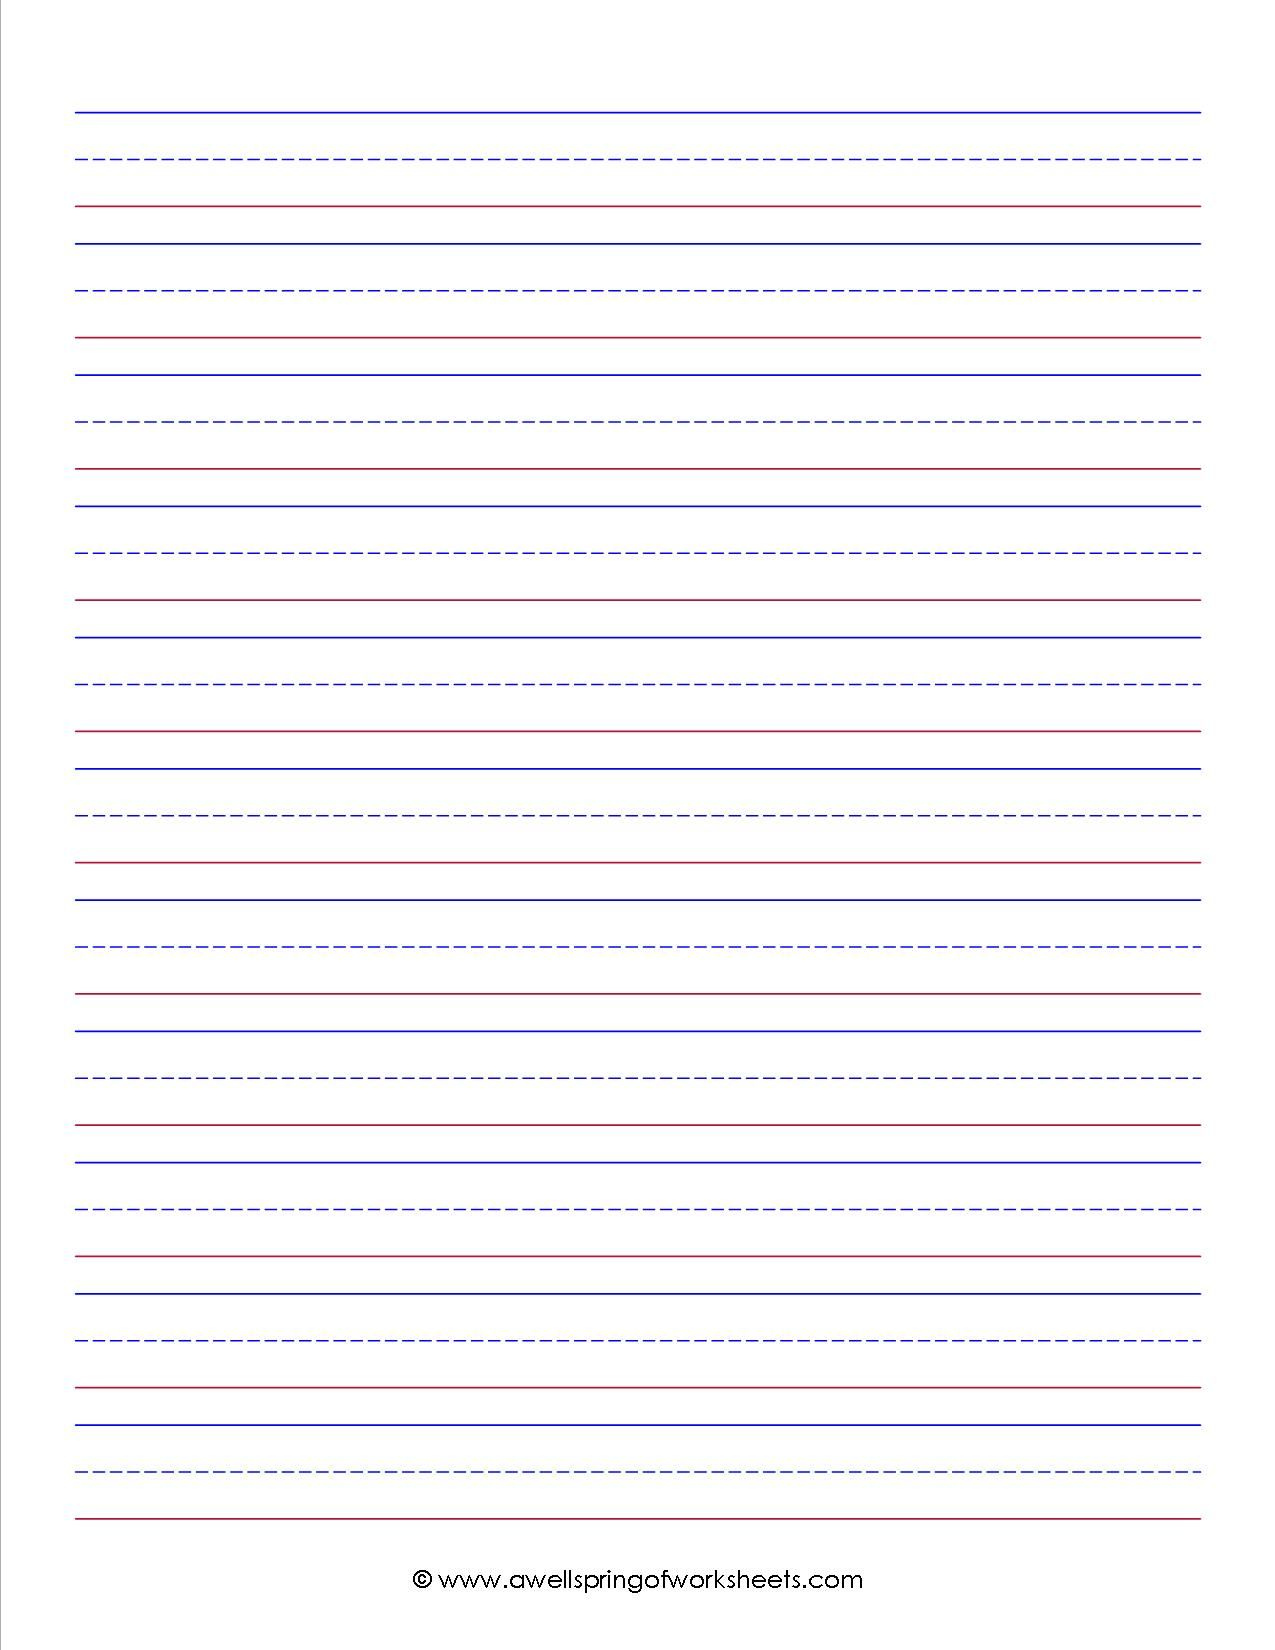 Primary Grade Lined Writing Paper Free Writing Paper Lined Writing 